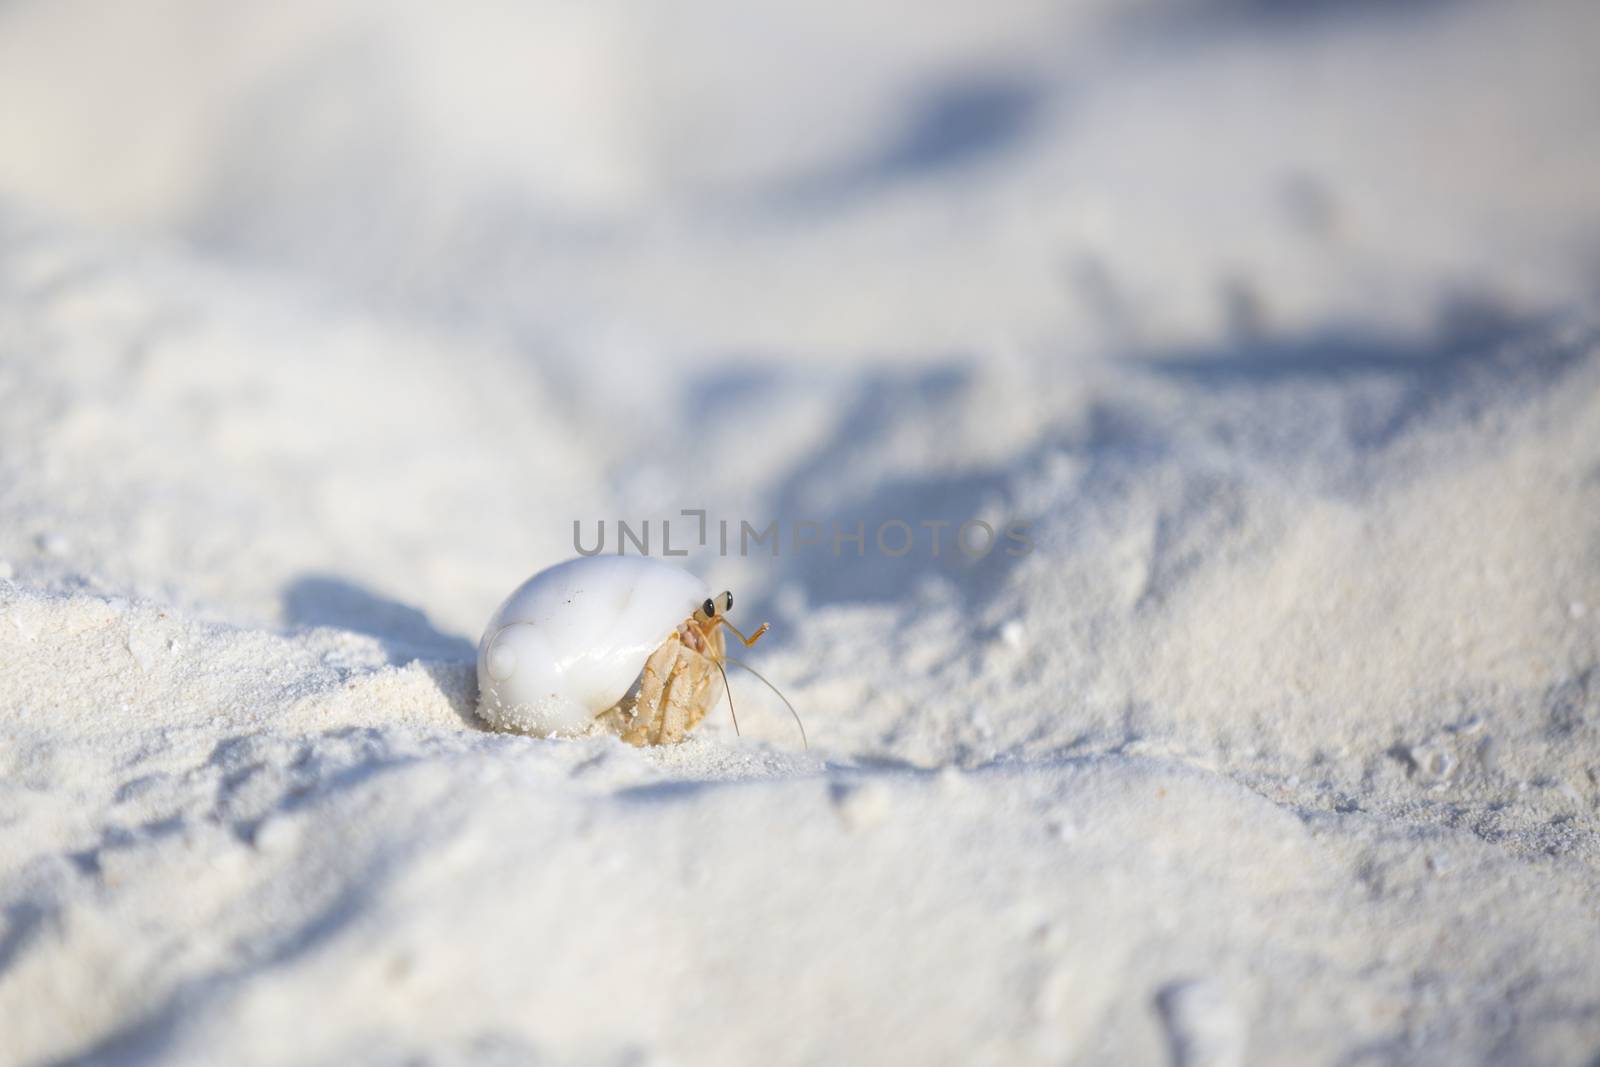 Hermit crab walking in the sand. Both the sand and the crab are purely white.